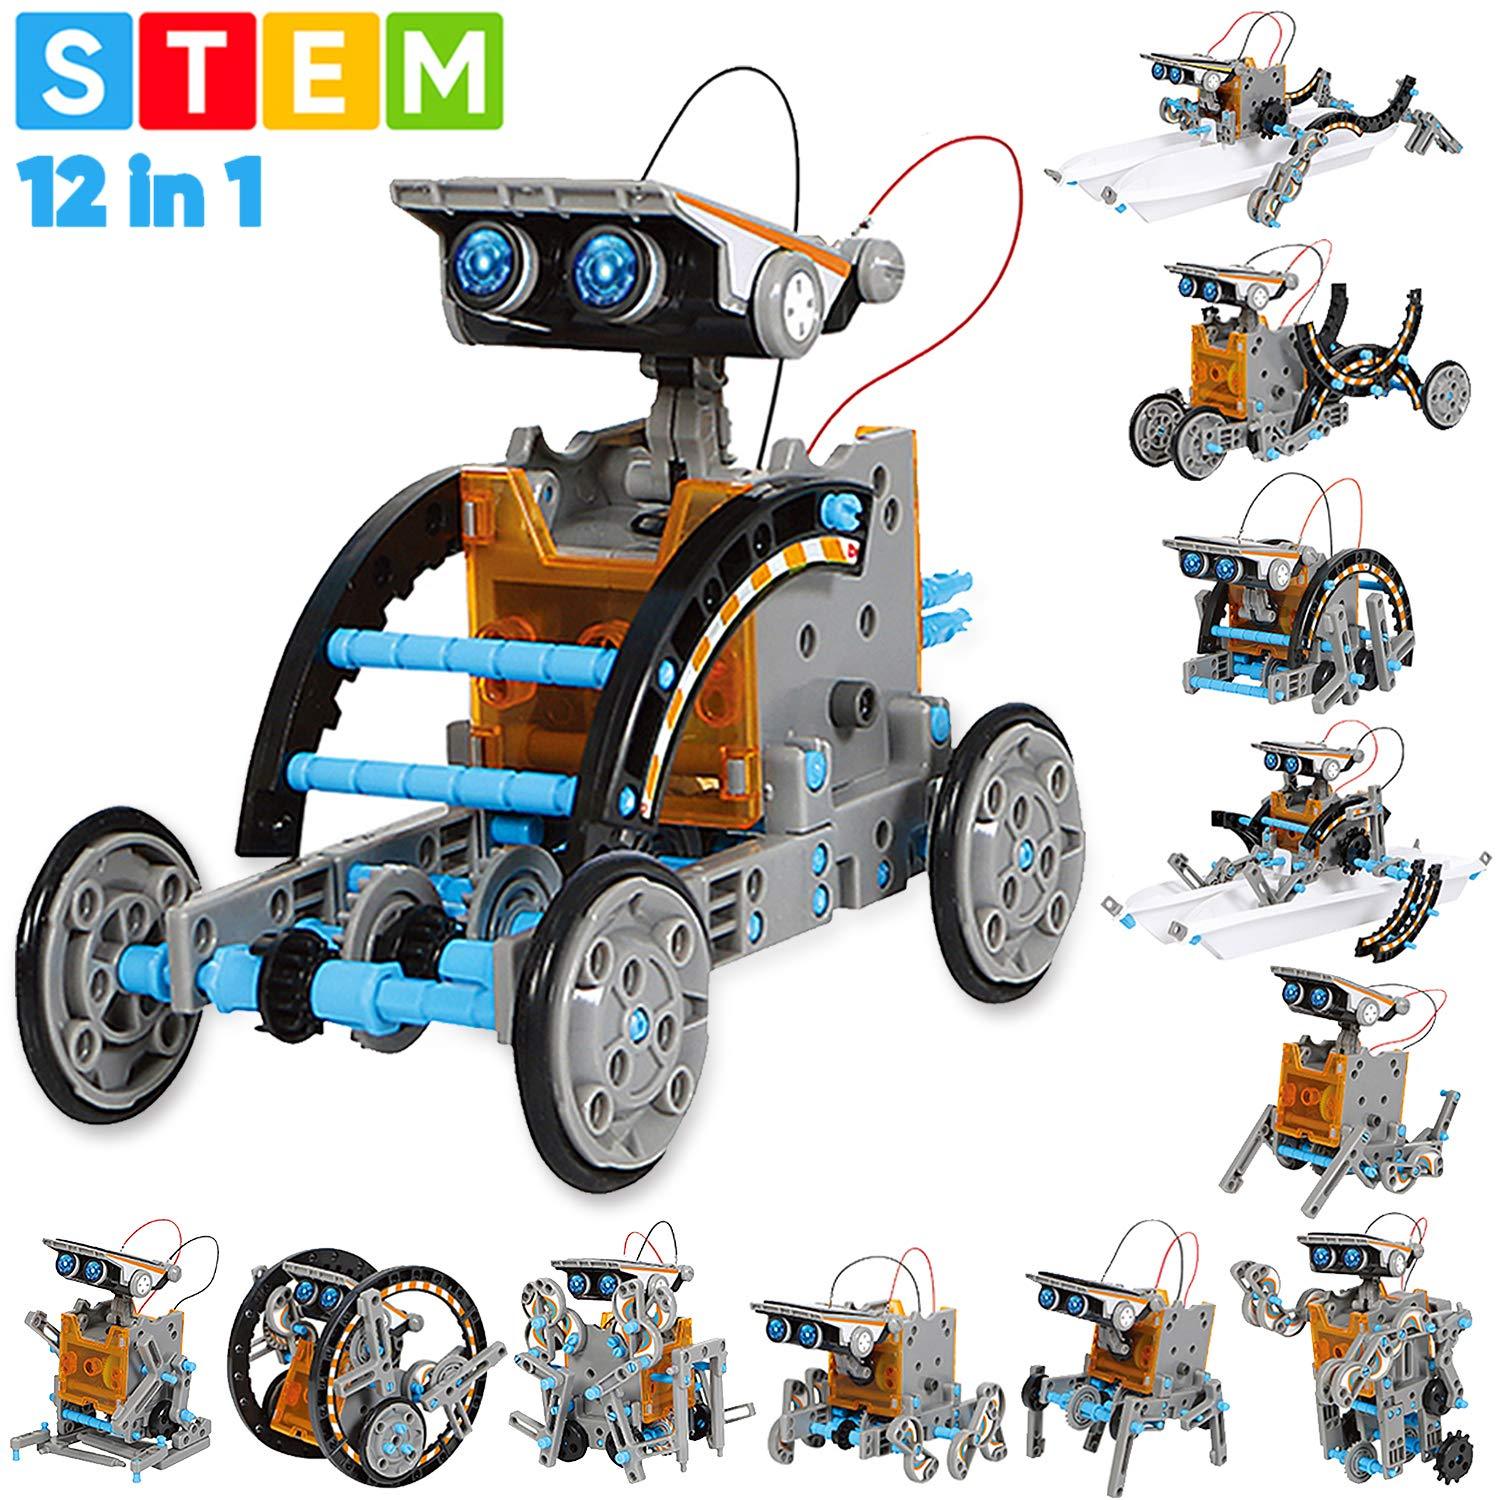 Sillbird STEM 12-in-1 Education Solar Robot Toys -190 Pieces DIY Building Science Experiment Kit for Kids Aged 8-10 and Older,Solar Powered by The Sun - image 1 of 6